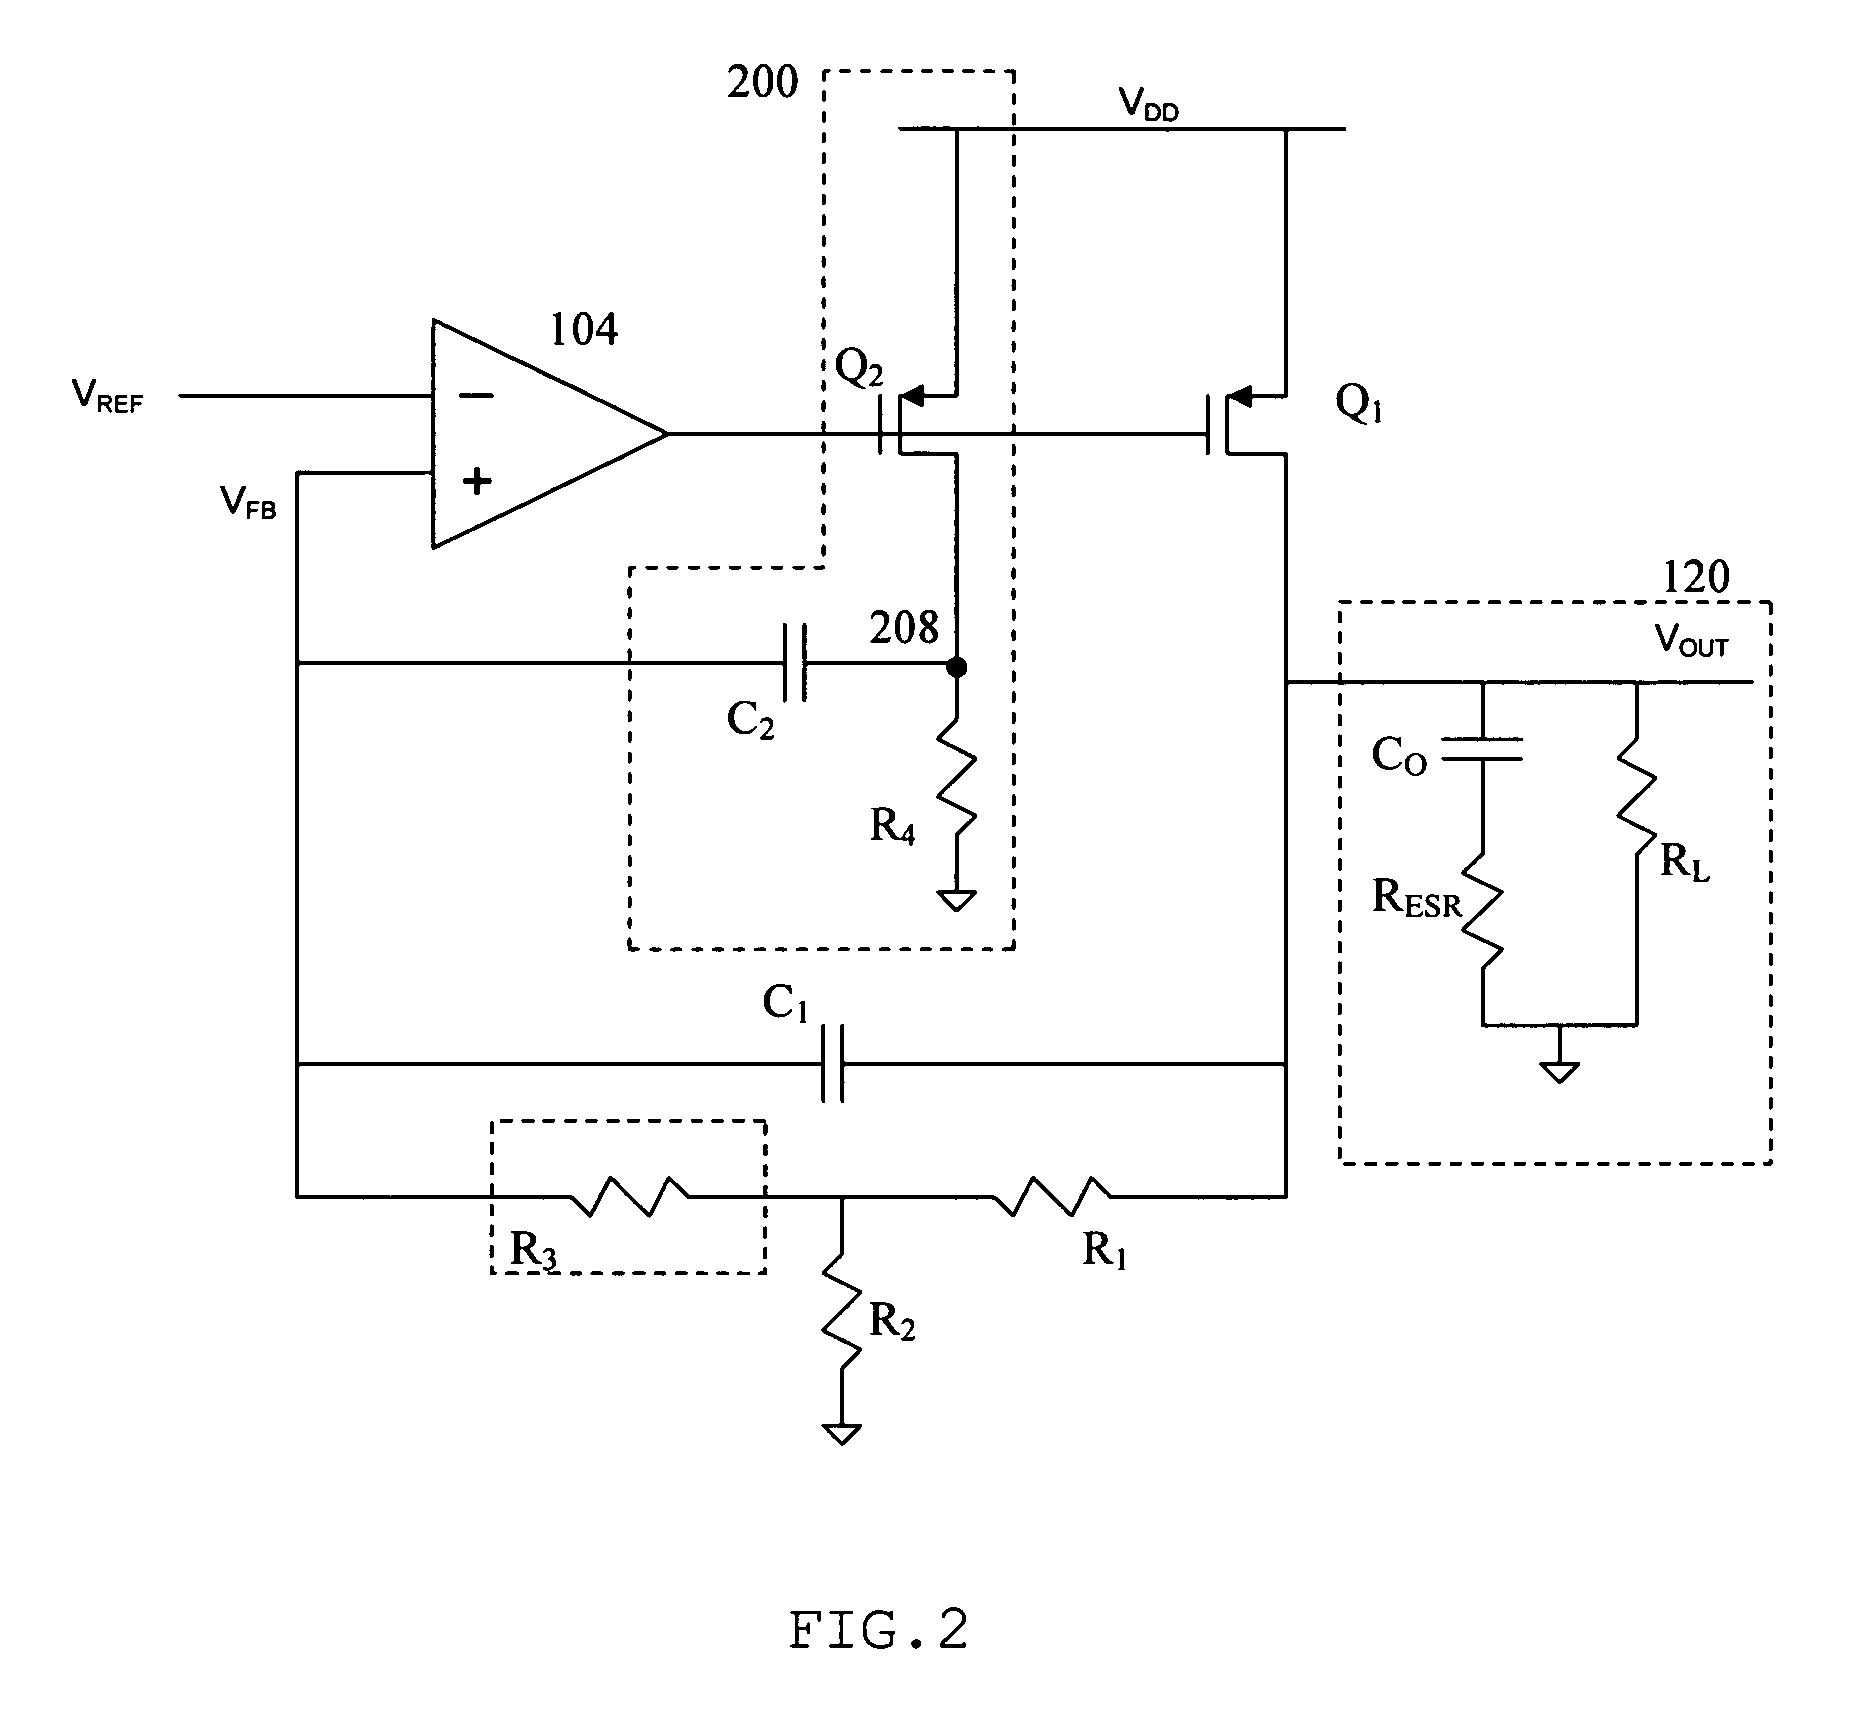 AC-coupled equivalent series resistance